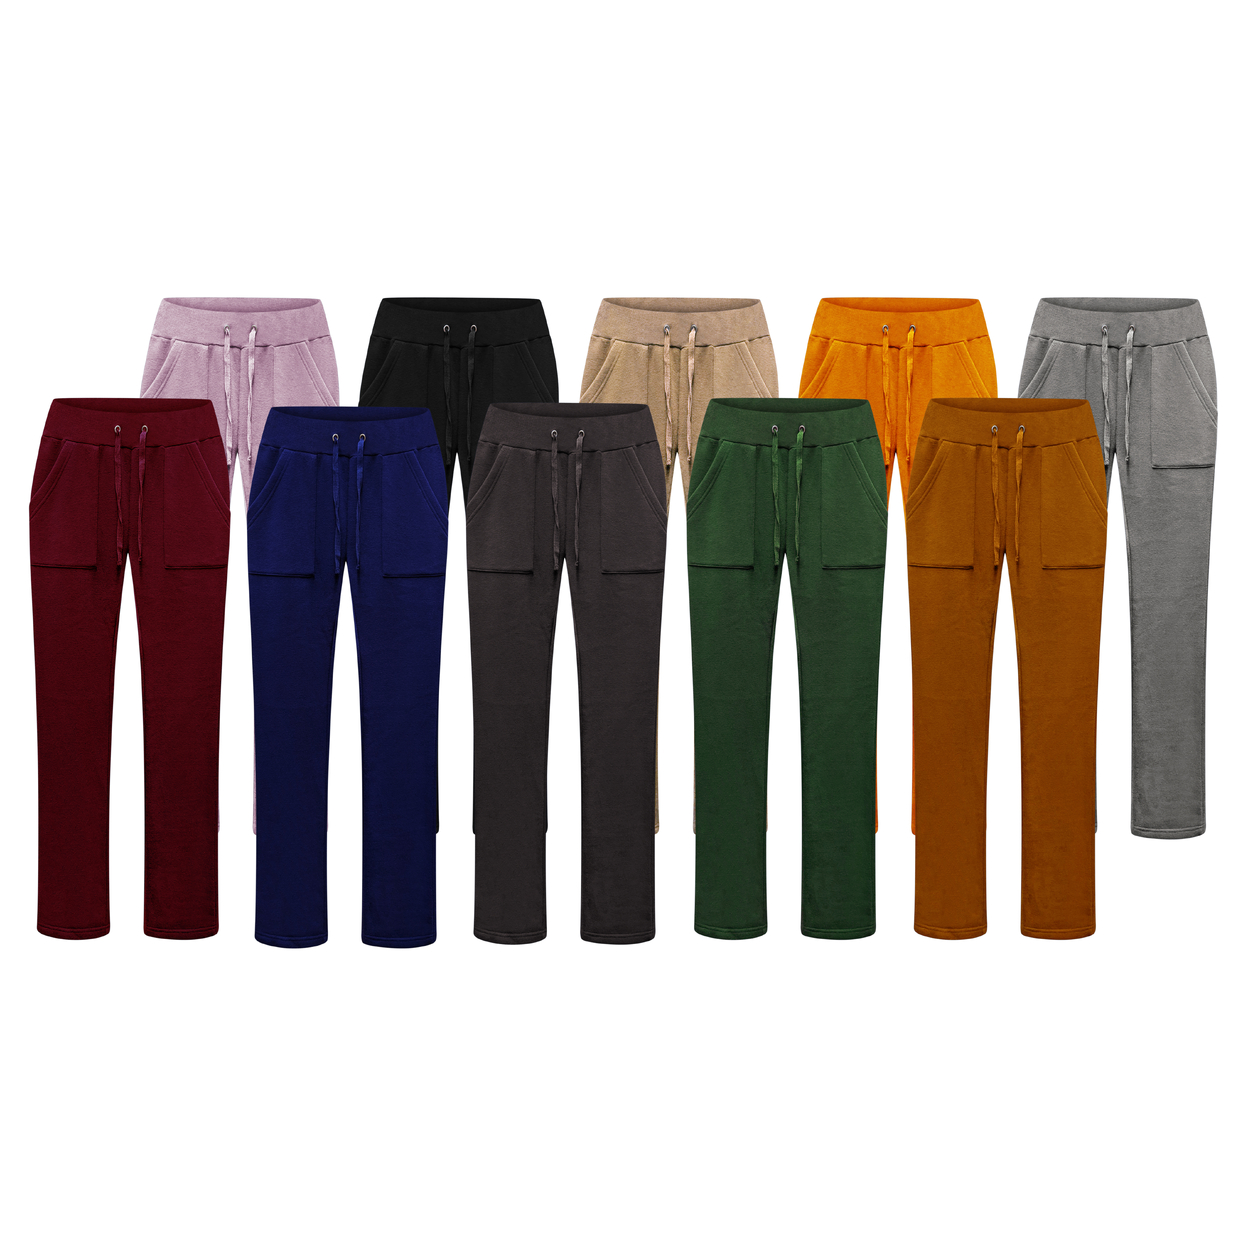 Women's Ultra Soft Cozy Fleece Lined Elastic Waistband Terry Knit Pants - Assorted, Small